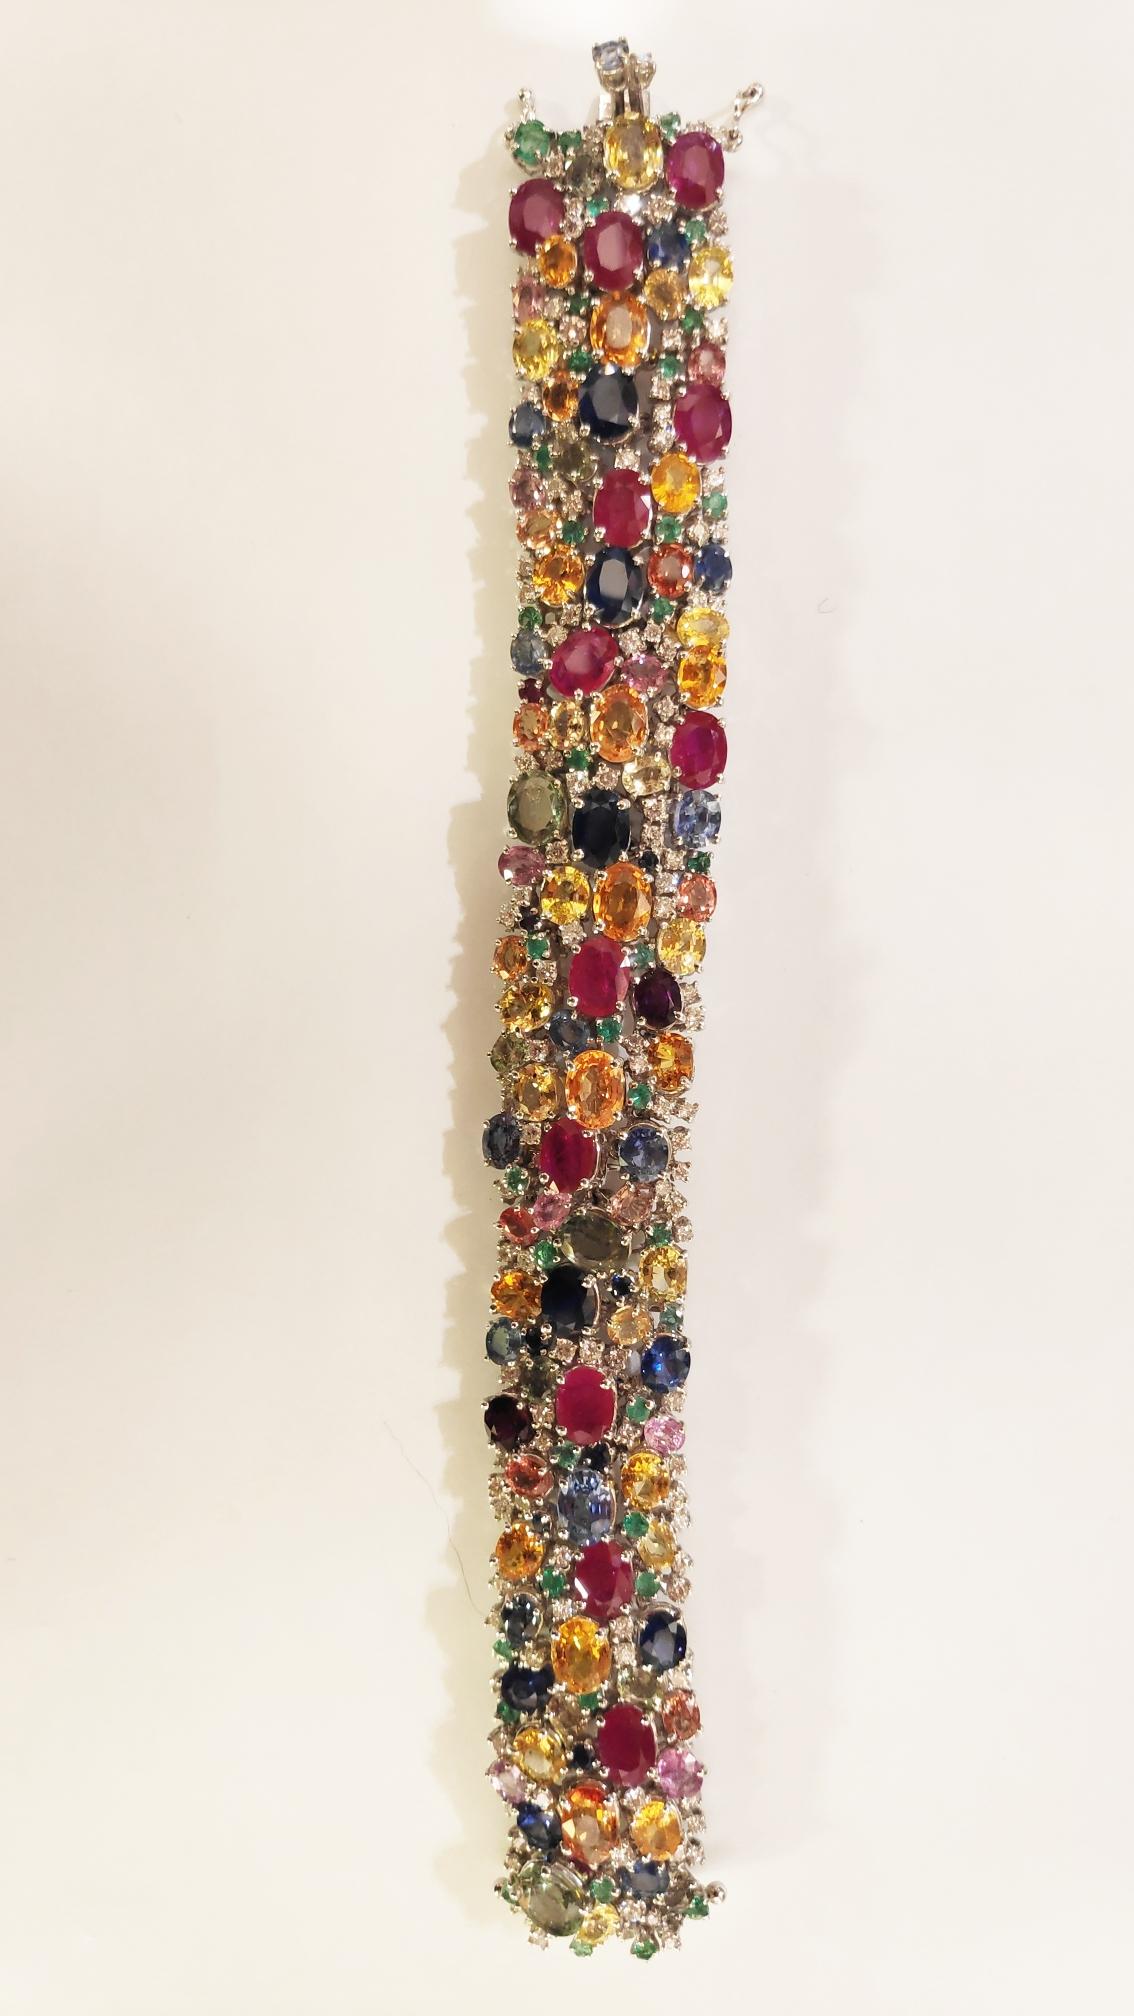 18 kt white gold bracelet, multi-colored sapphires, diamonds, emeralds and rubies, total color stones 108 ct and total brilliants ct 8.50
